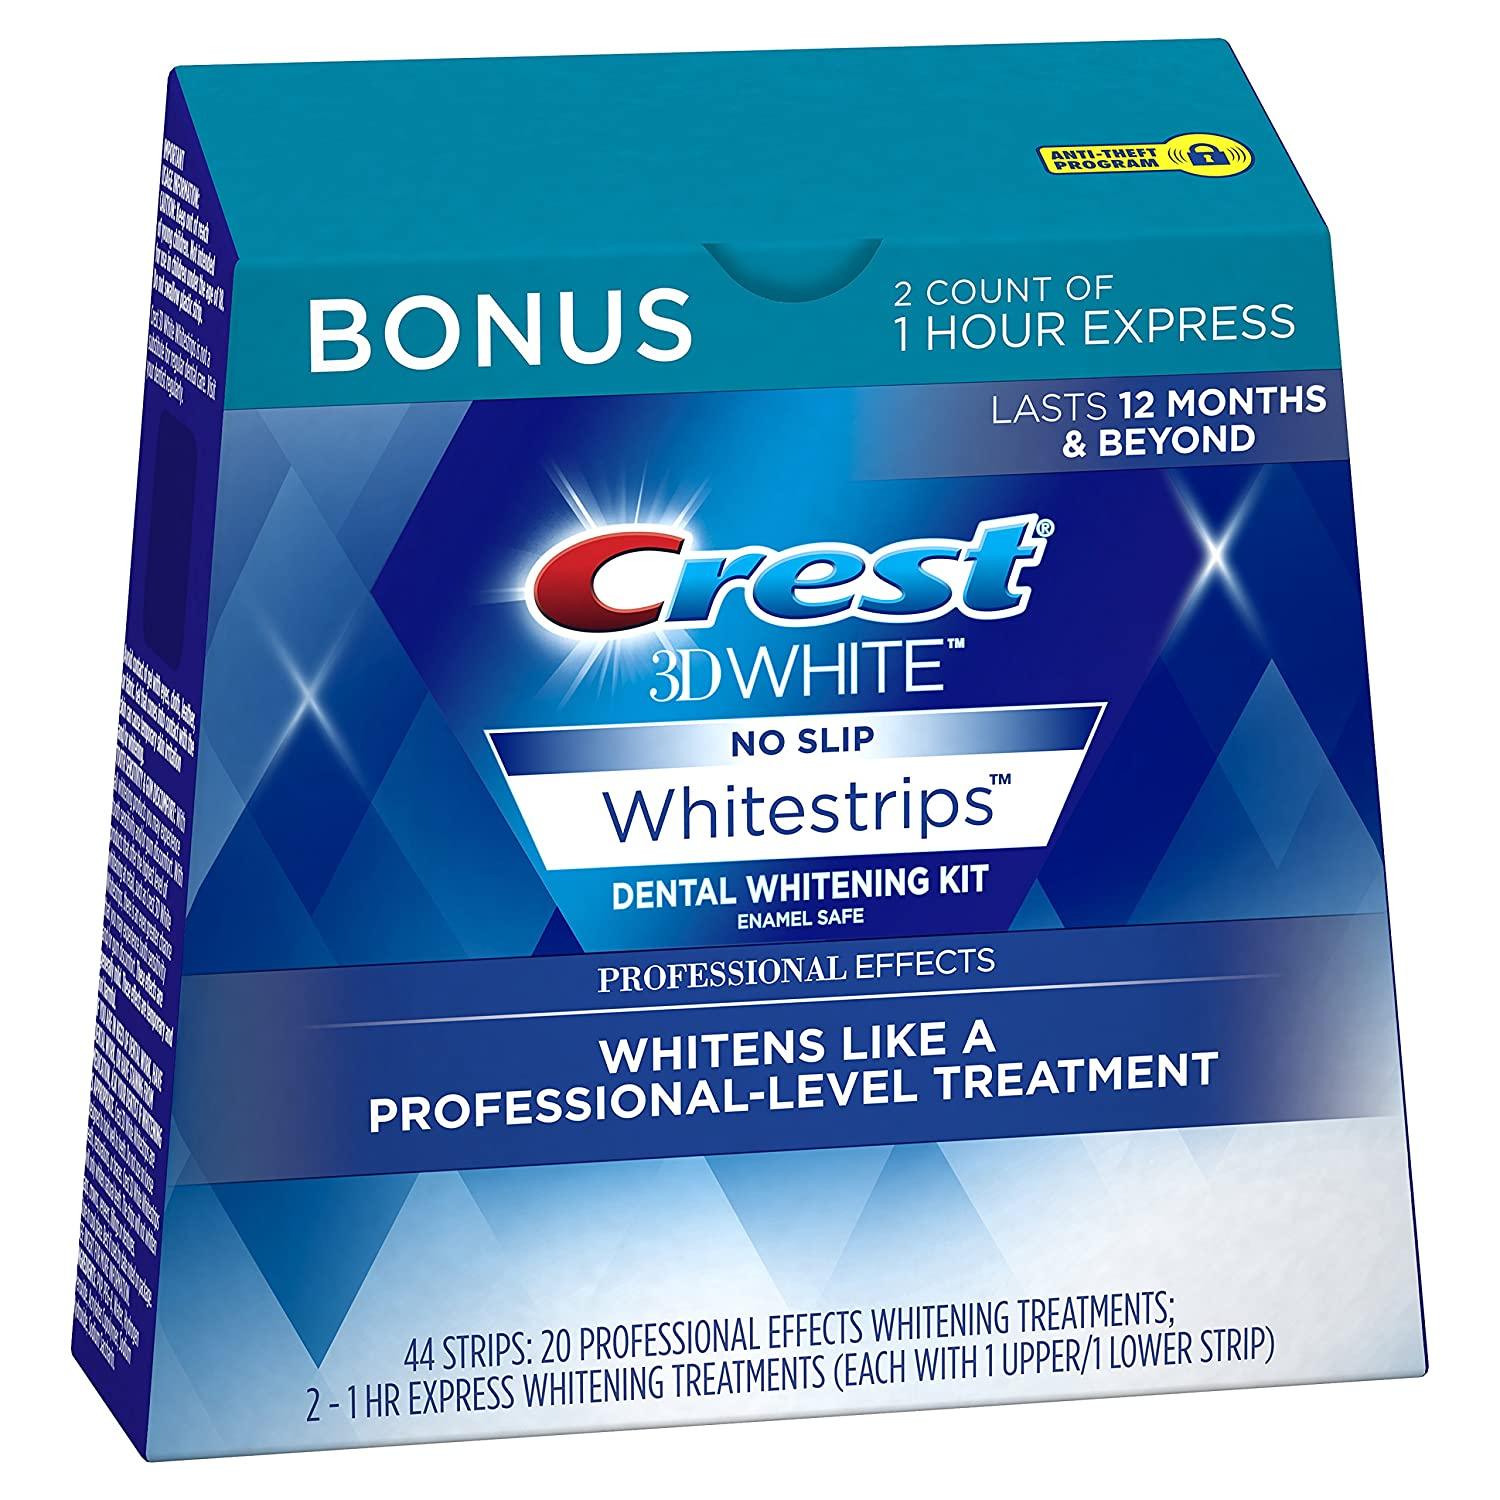 22 Crest 3D White Professional Effects Whitestrips for $27.96 Shipped